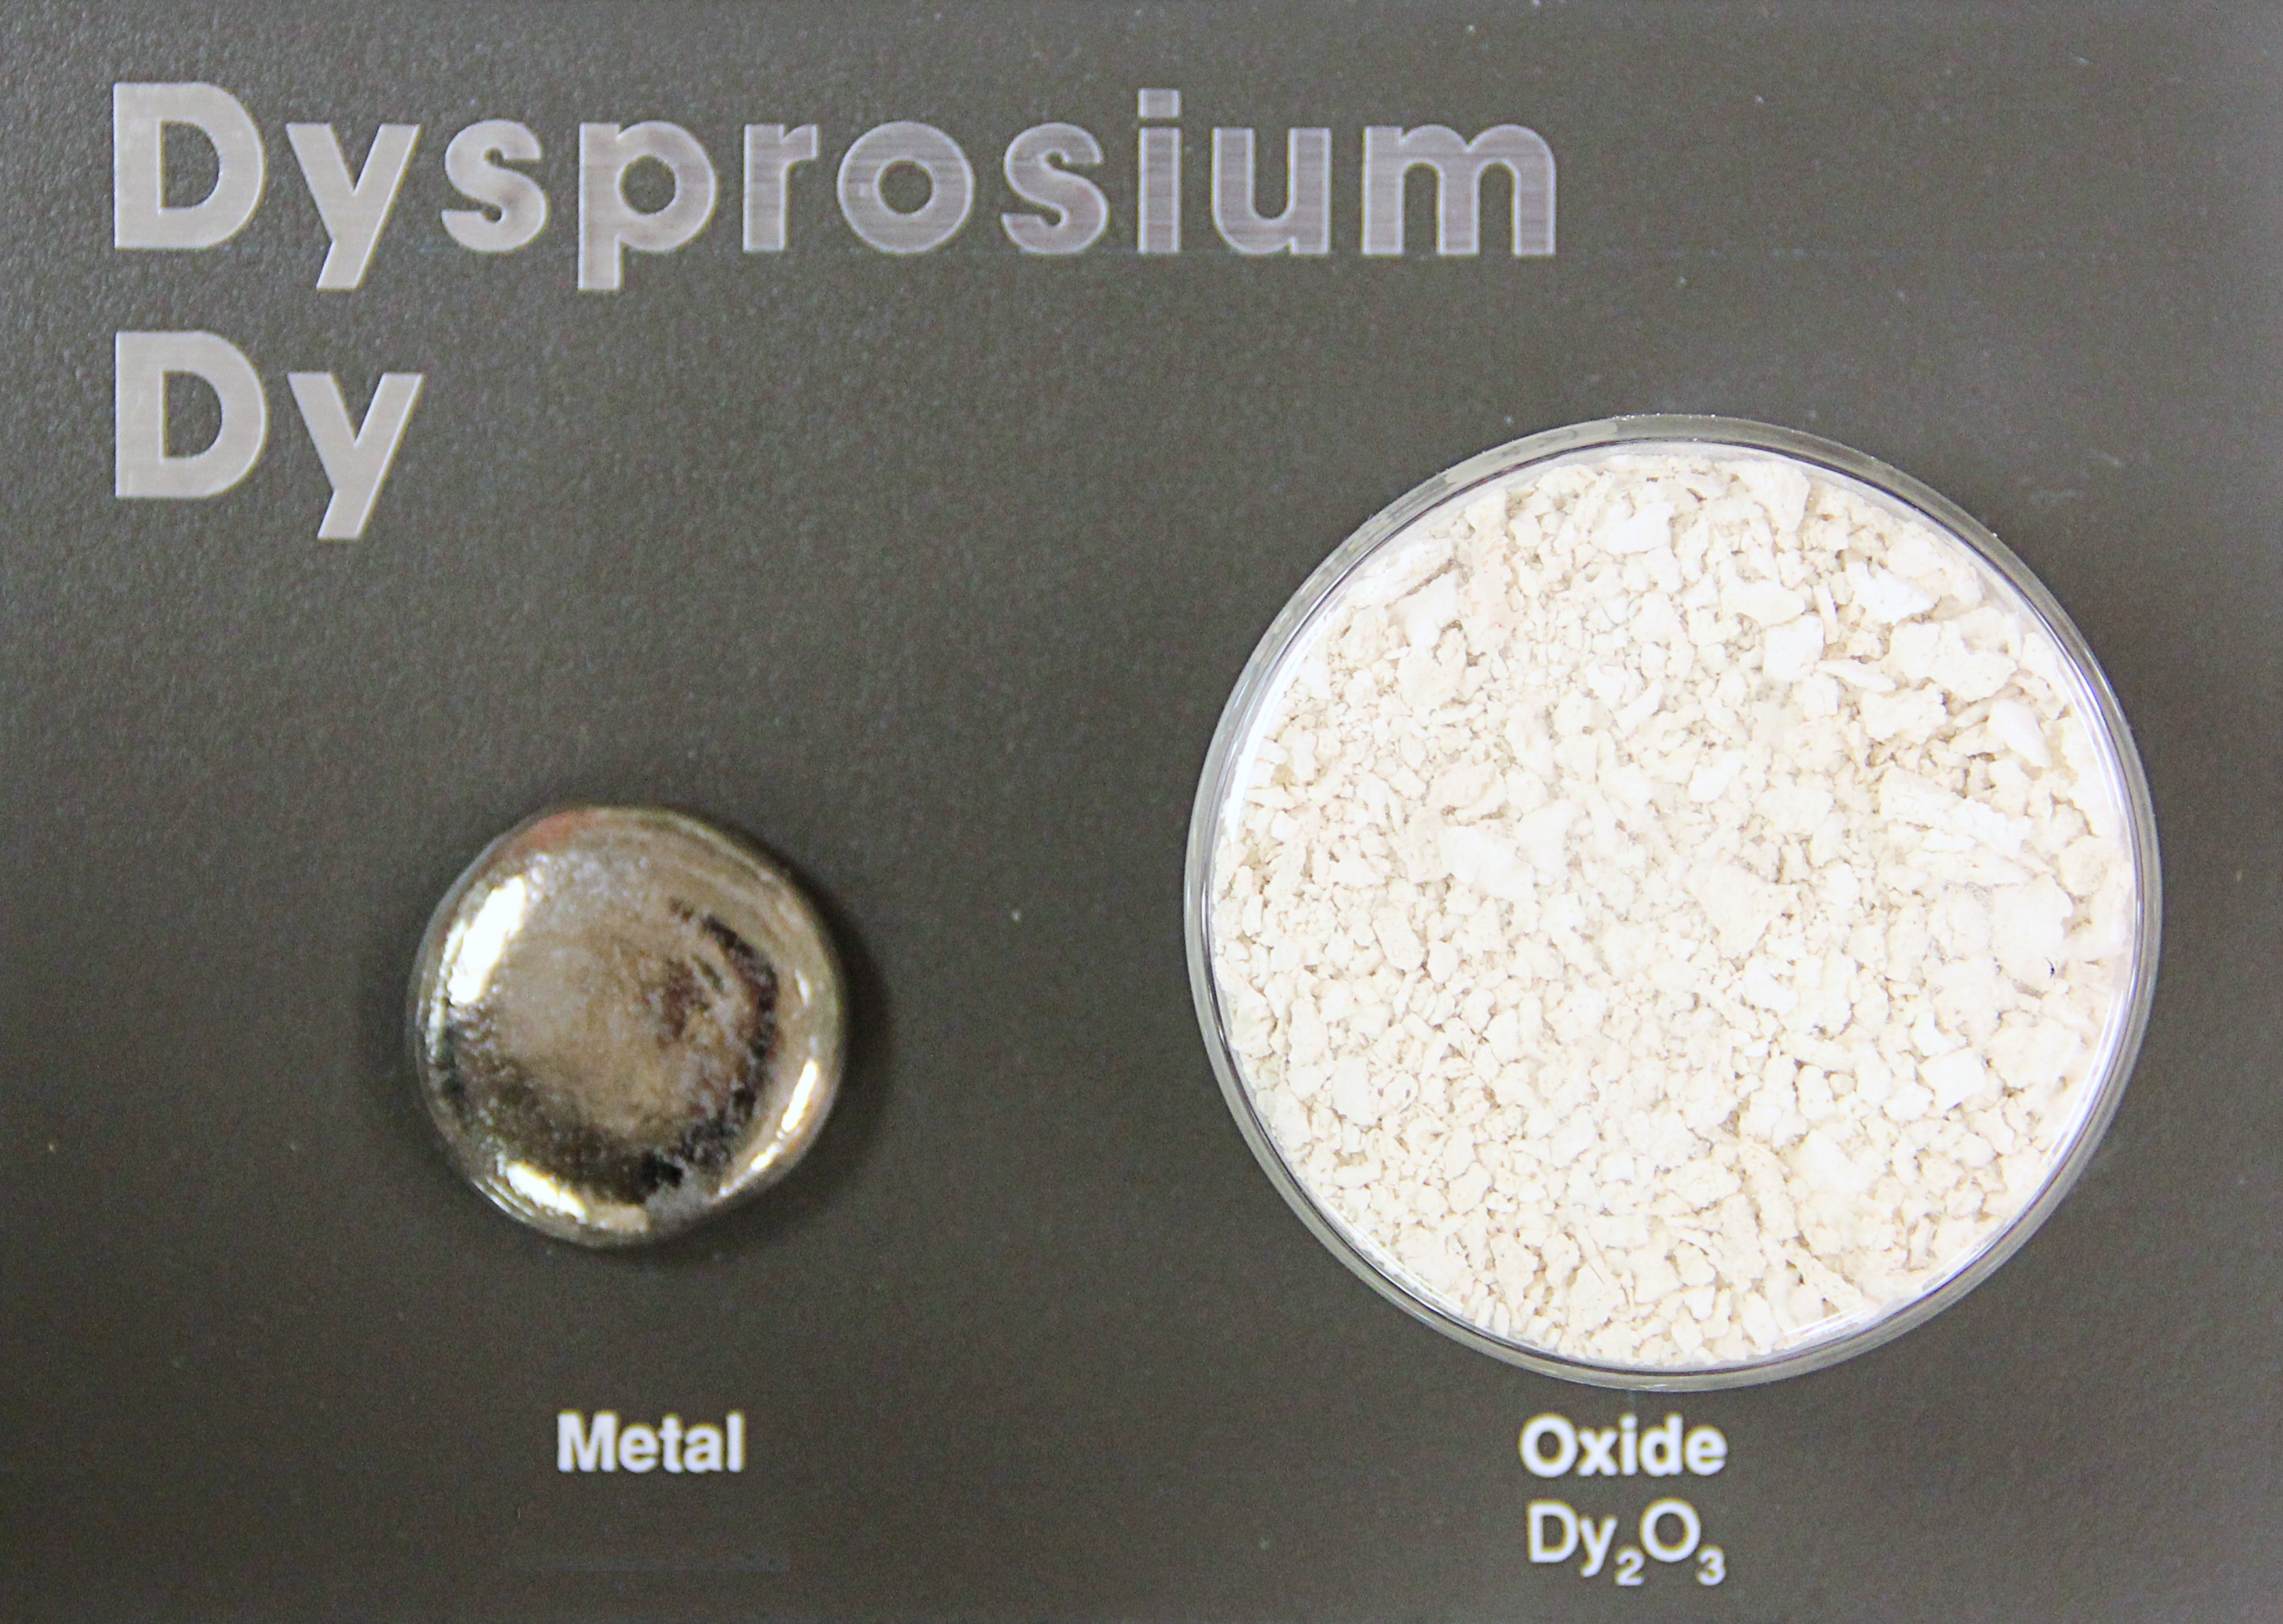 Dysprosium metal and oxide